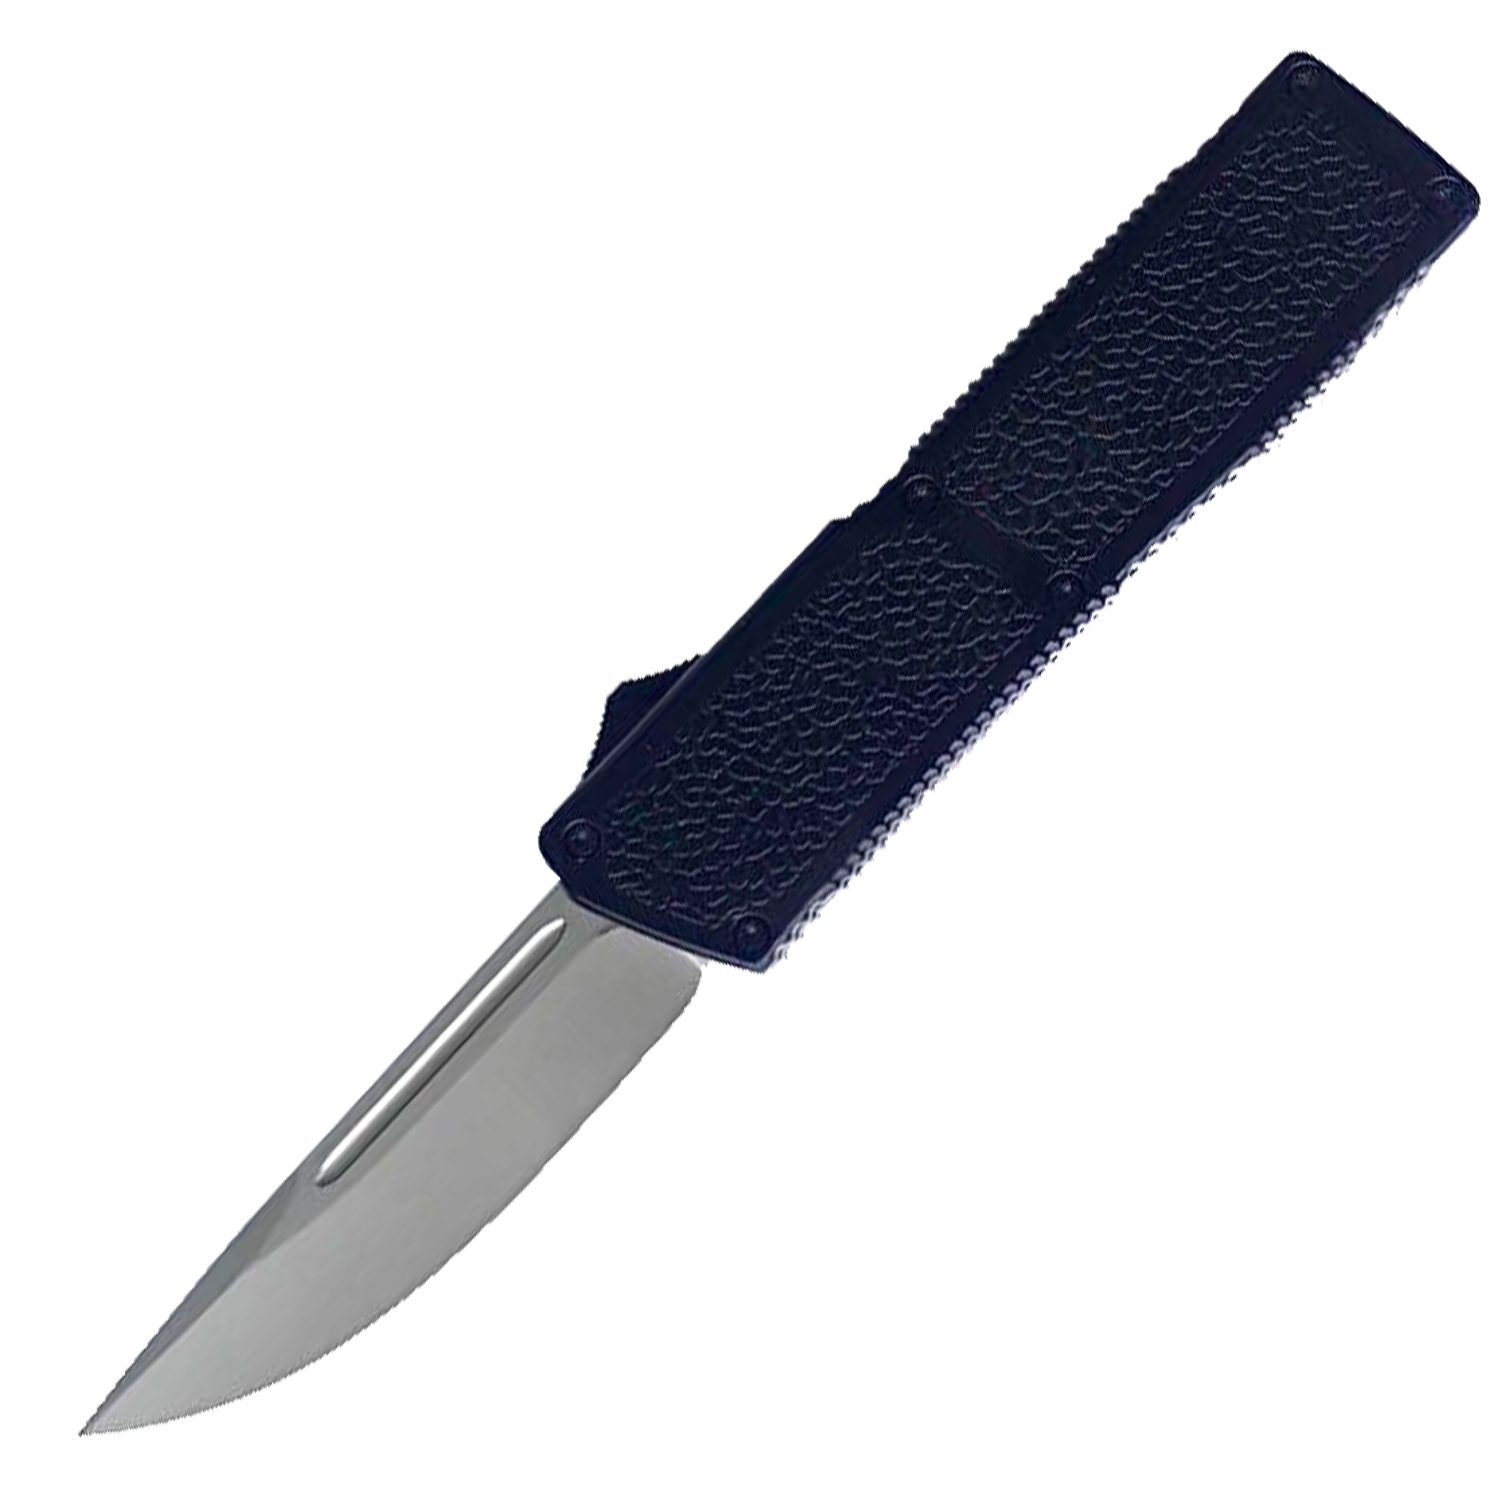 Lighting Action Assisted Knife Silver Drop Point Black